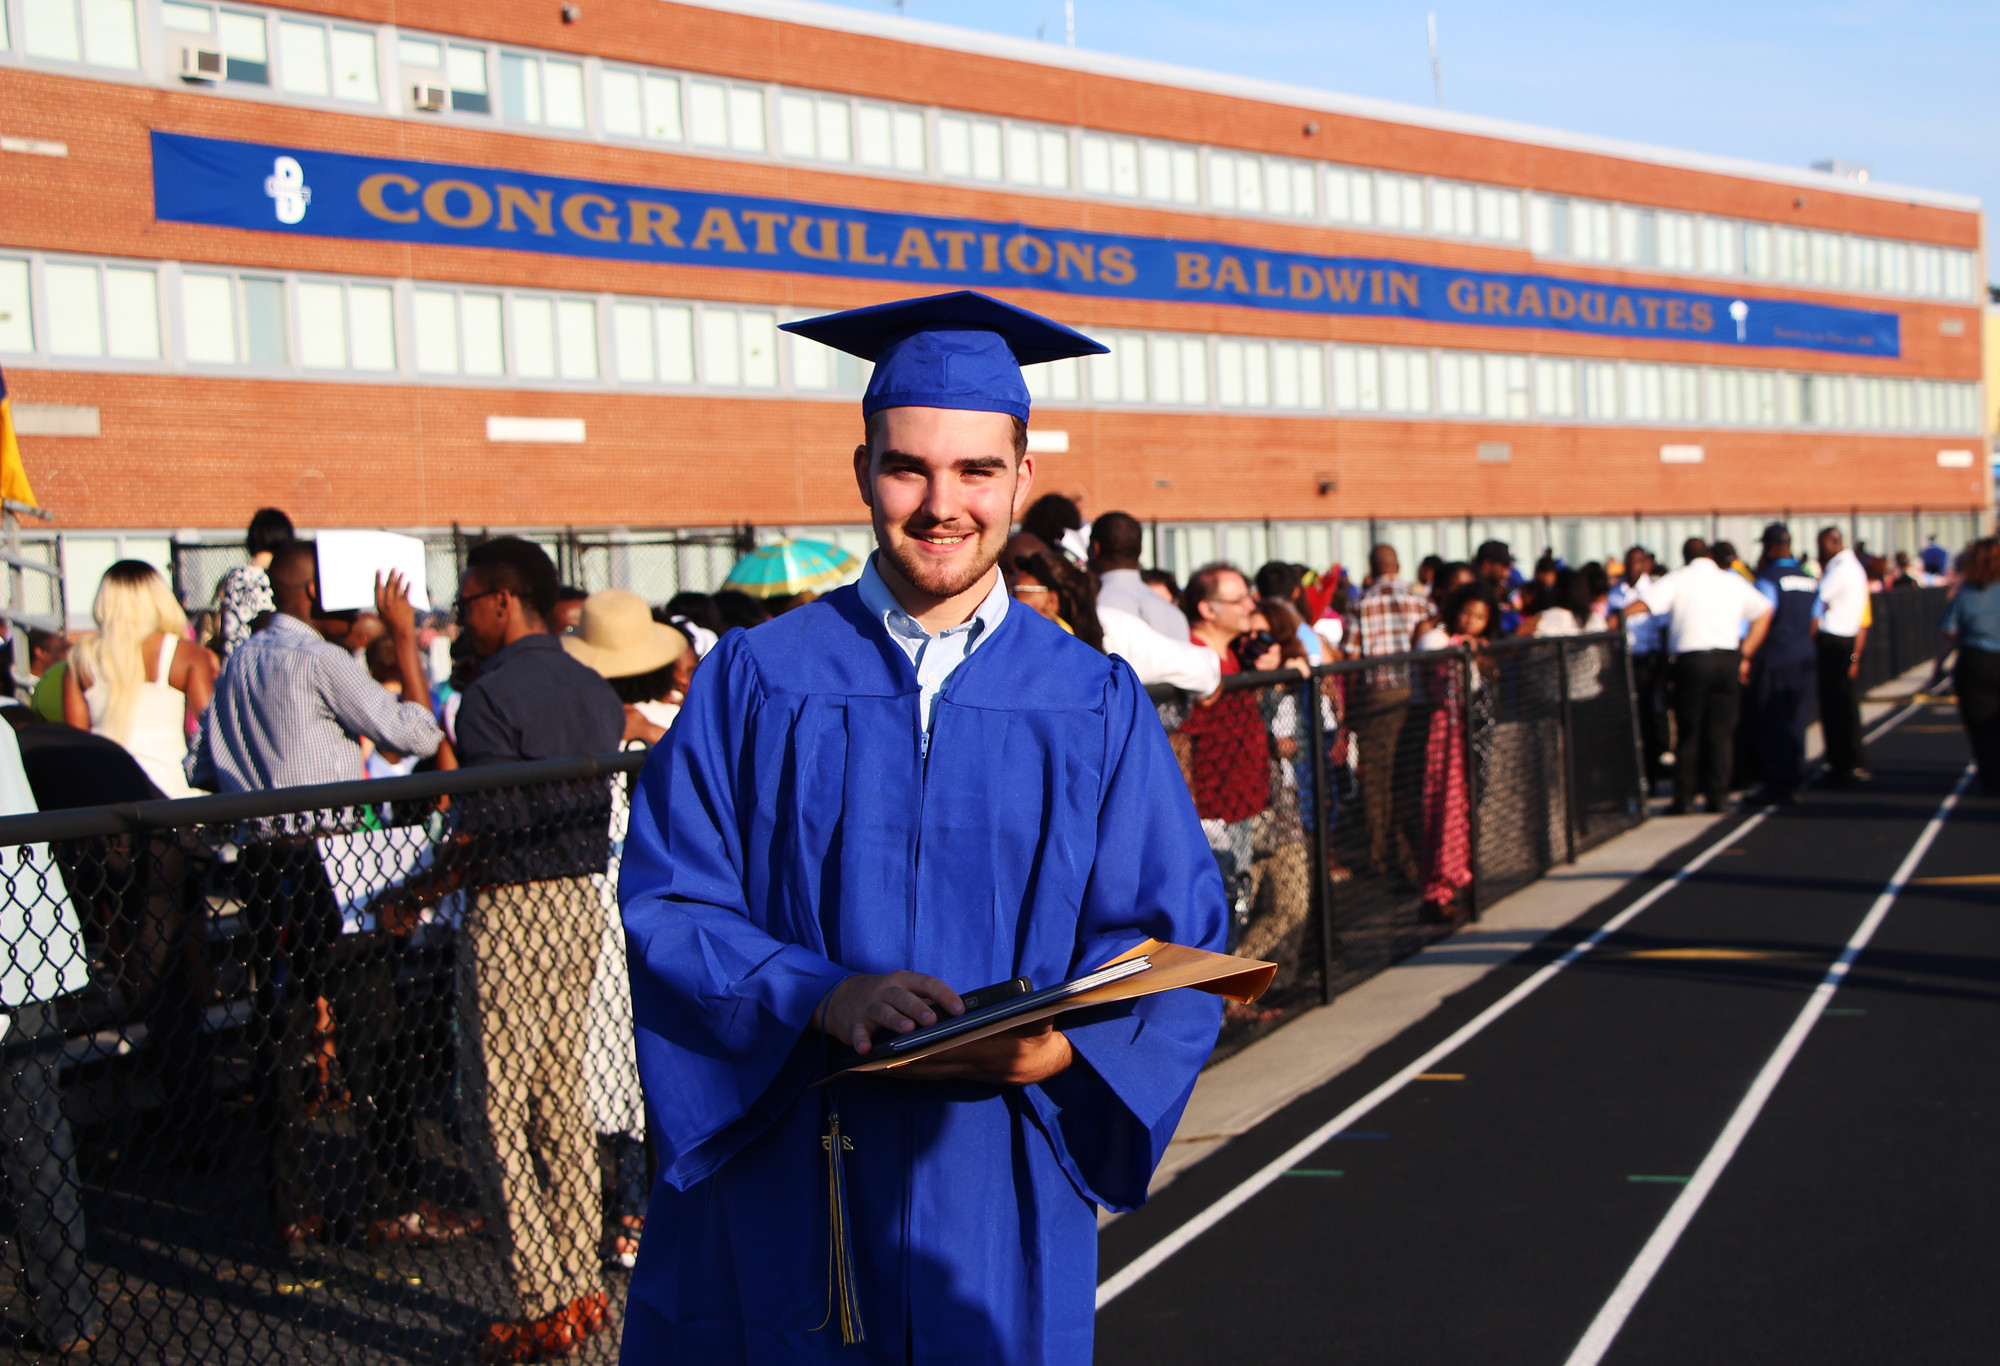 Frank Gallagher was one of many excited Baldwin High School seniors who graduated last Friday.